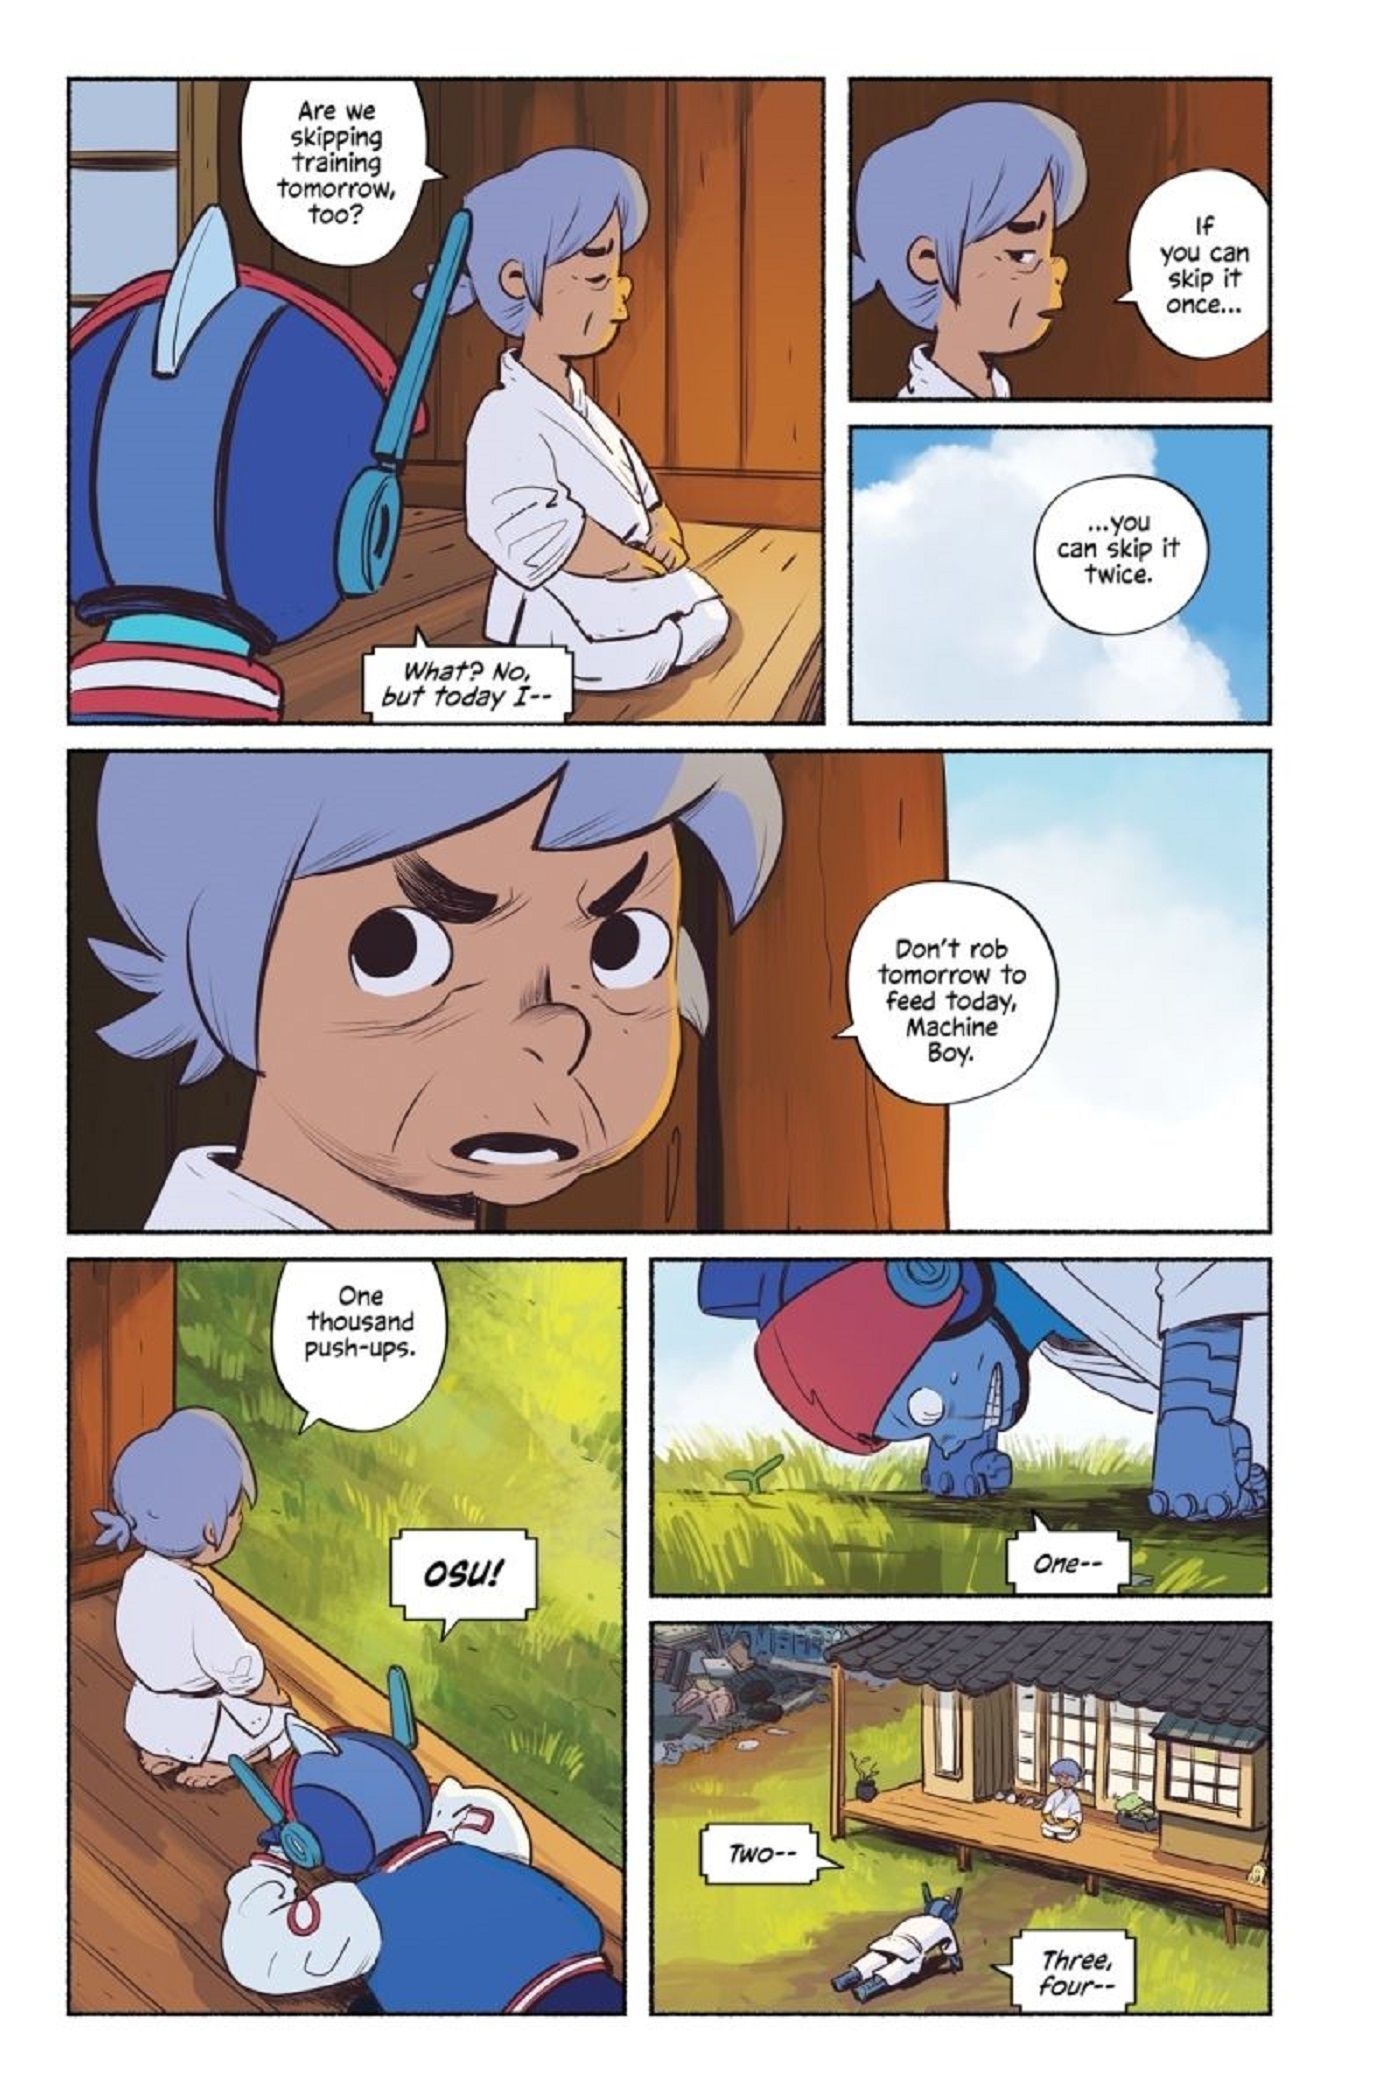 Everyday Hero Machine Boy OGN Preview Page 4